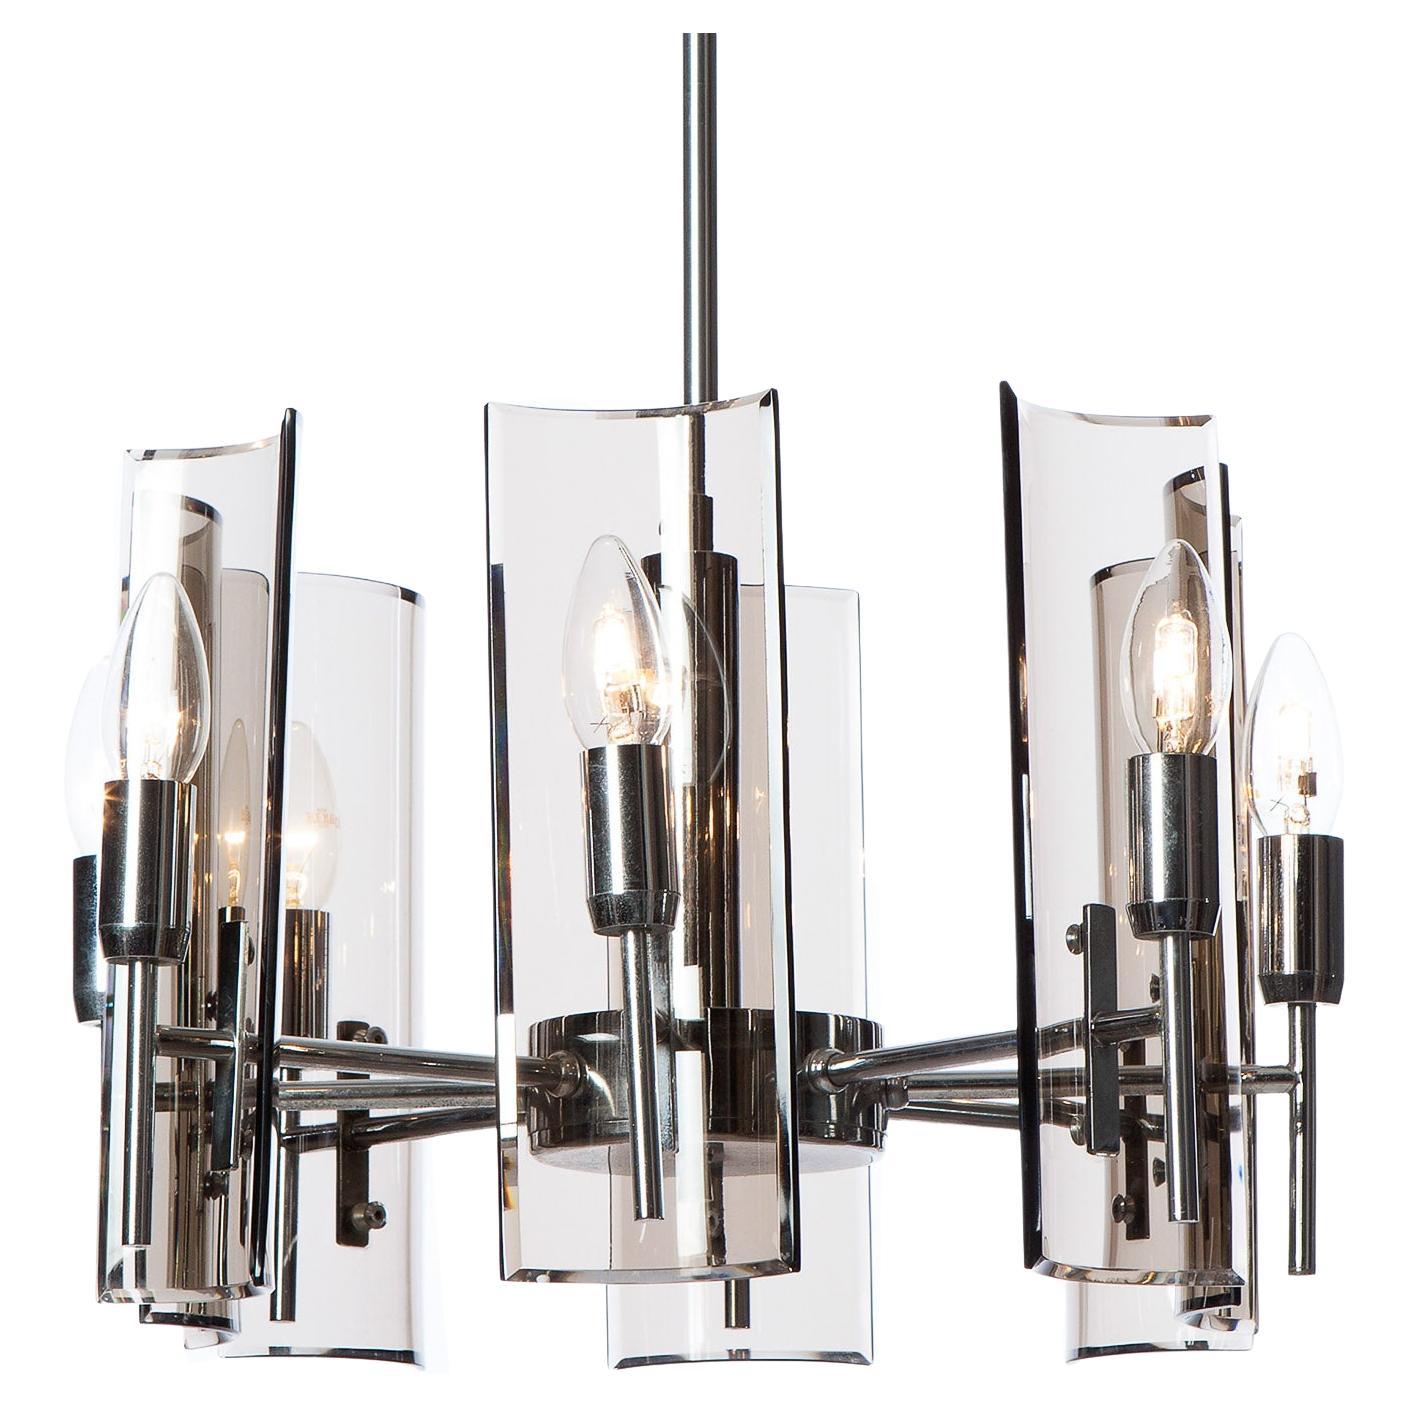 1950's eight light Chrome and Glass Chandelier Light by Crystal Arte